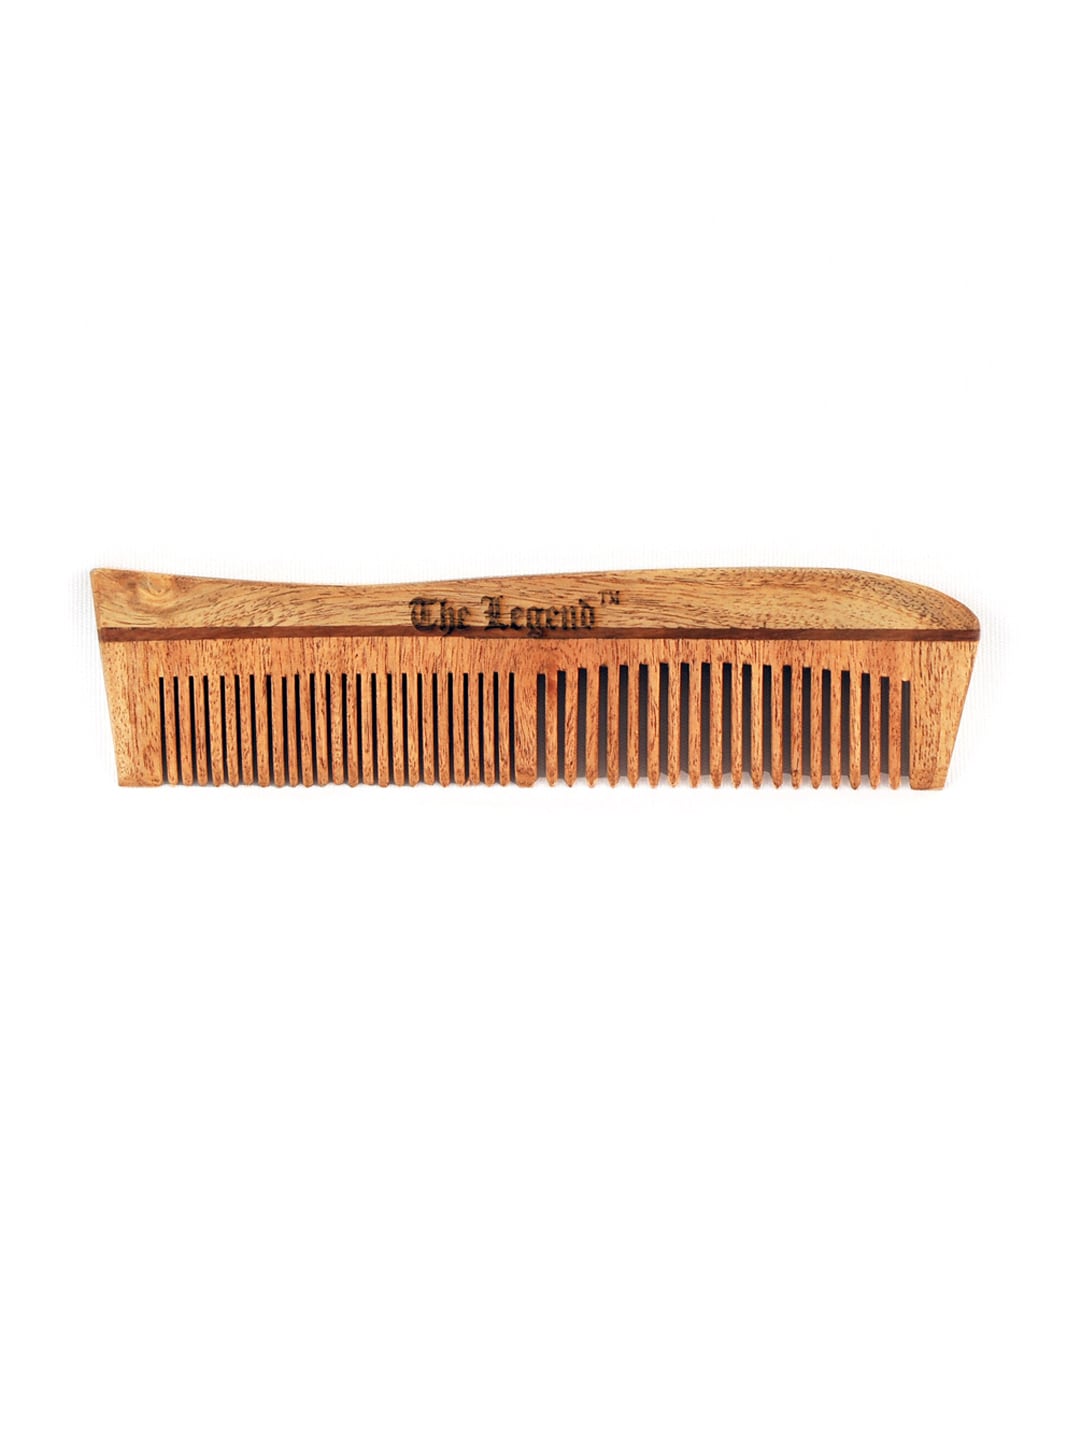 The Legend Organic Neem Wood Comb with Shark Finn Style Price in India